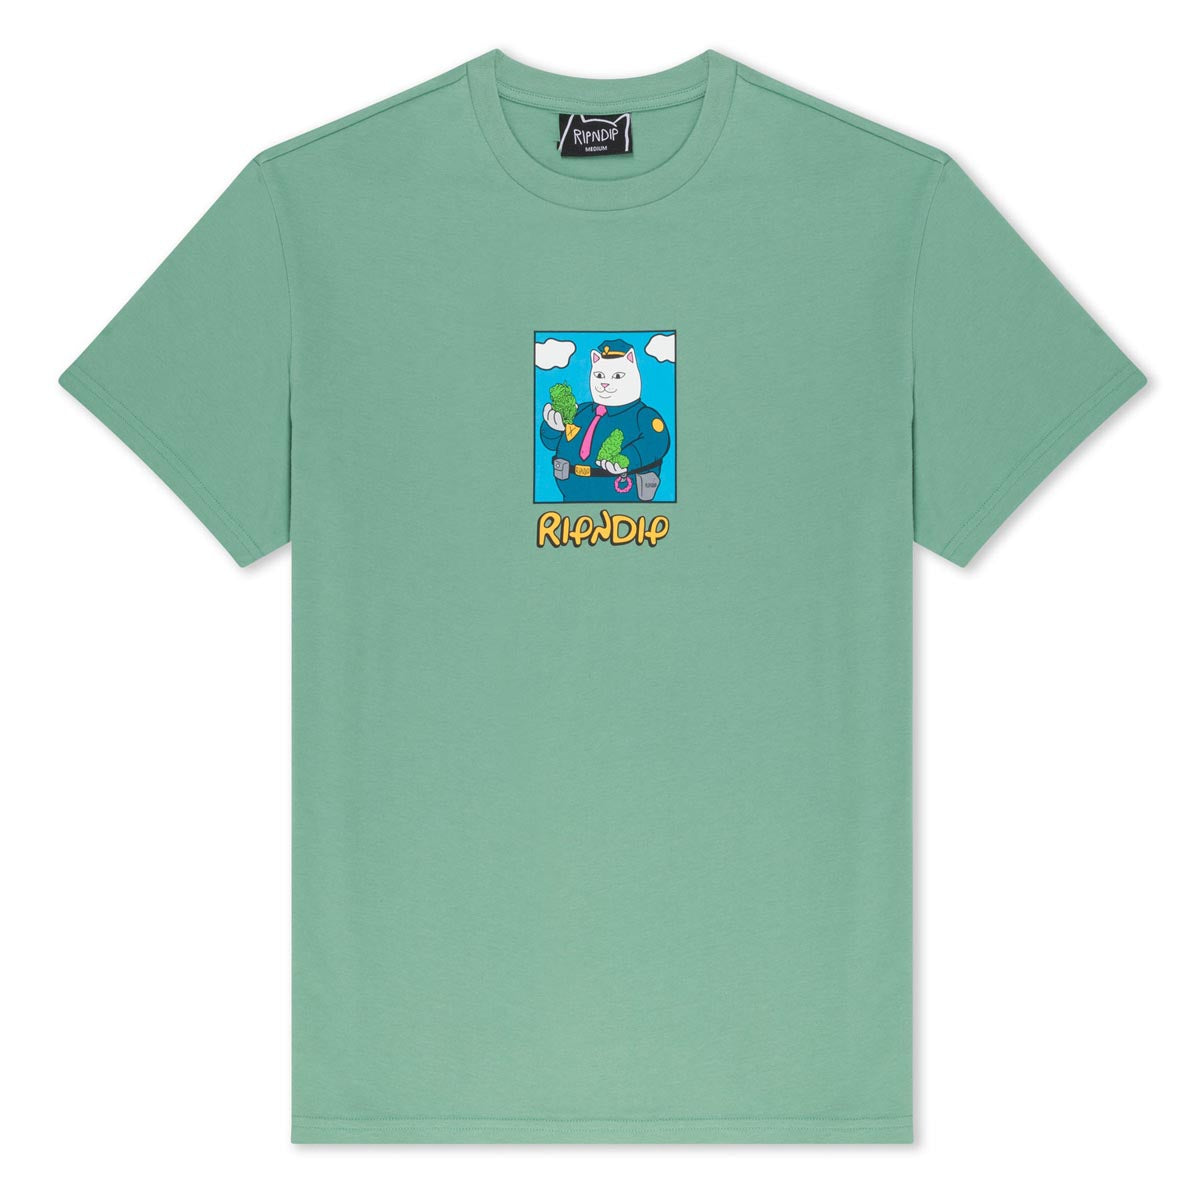 RIPNDIP Confiscated T-Shirt - Pine image 1